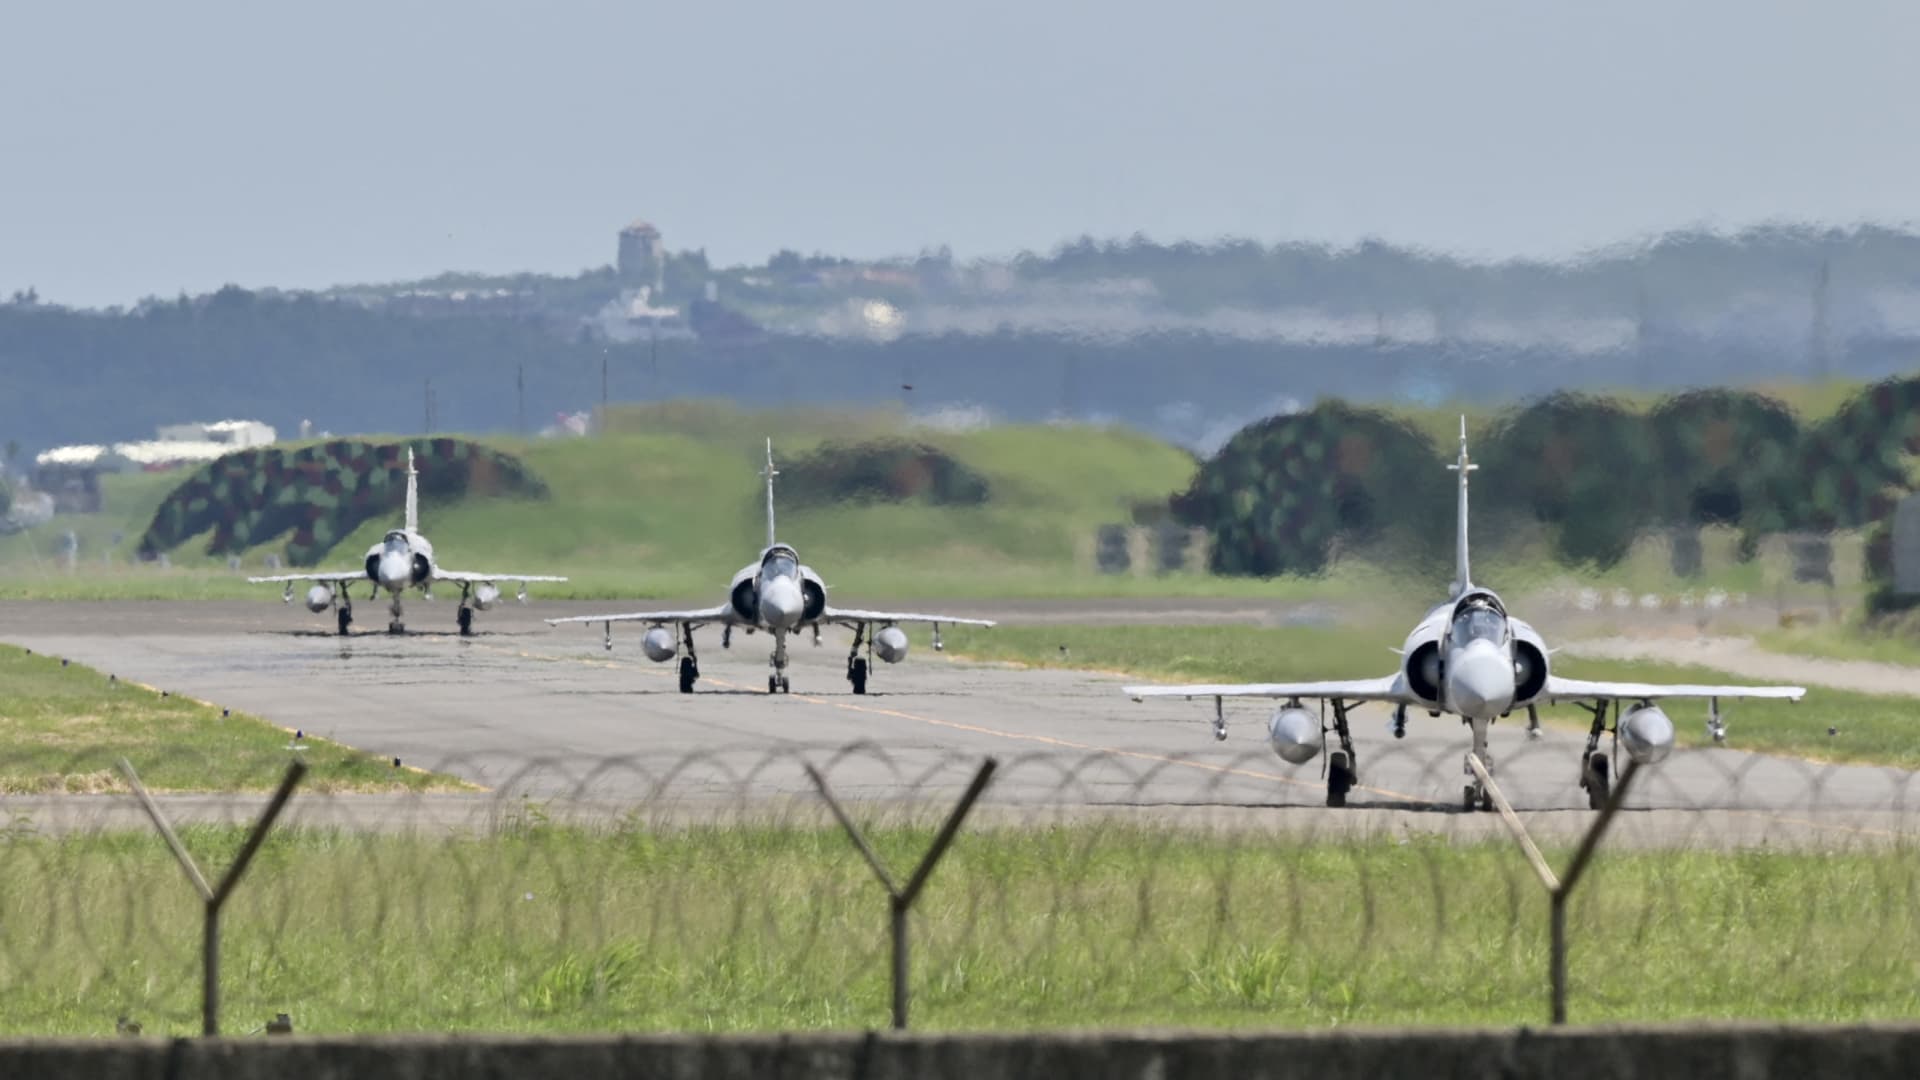 During the previous Taiwan Crisis, China’s military had overtaken US forces.  Not now.